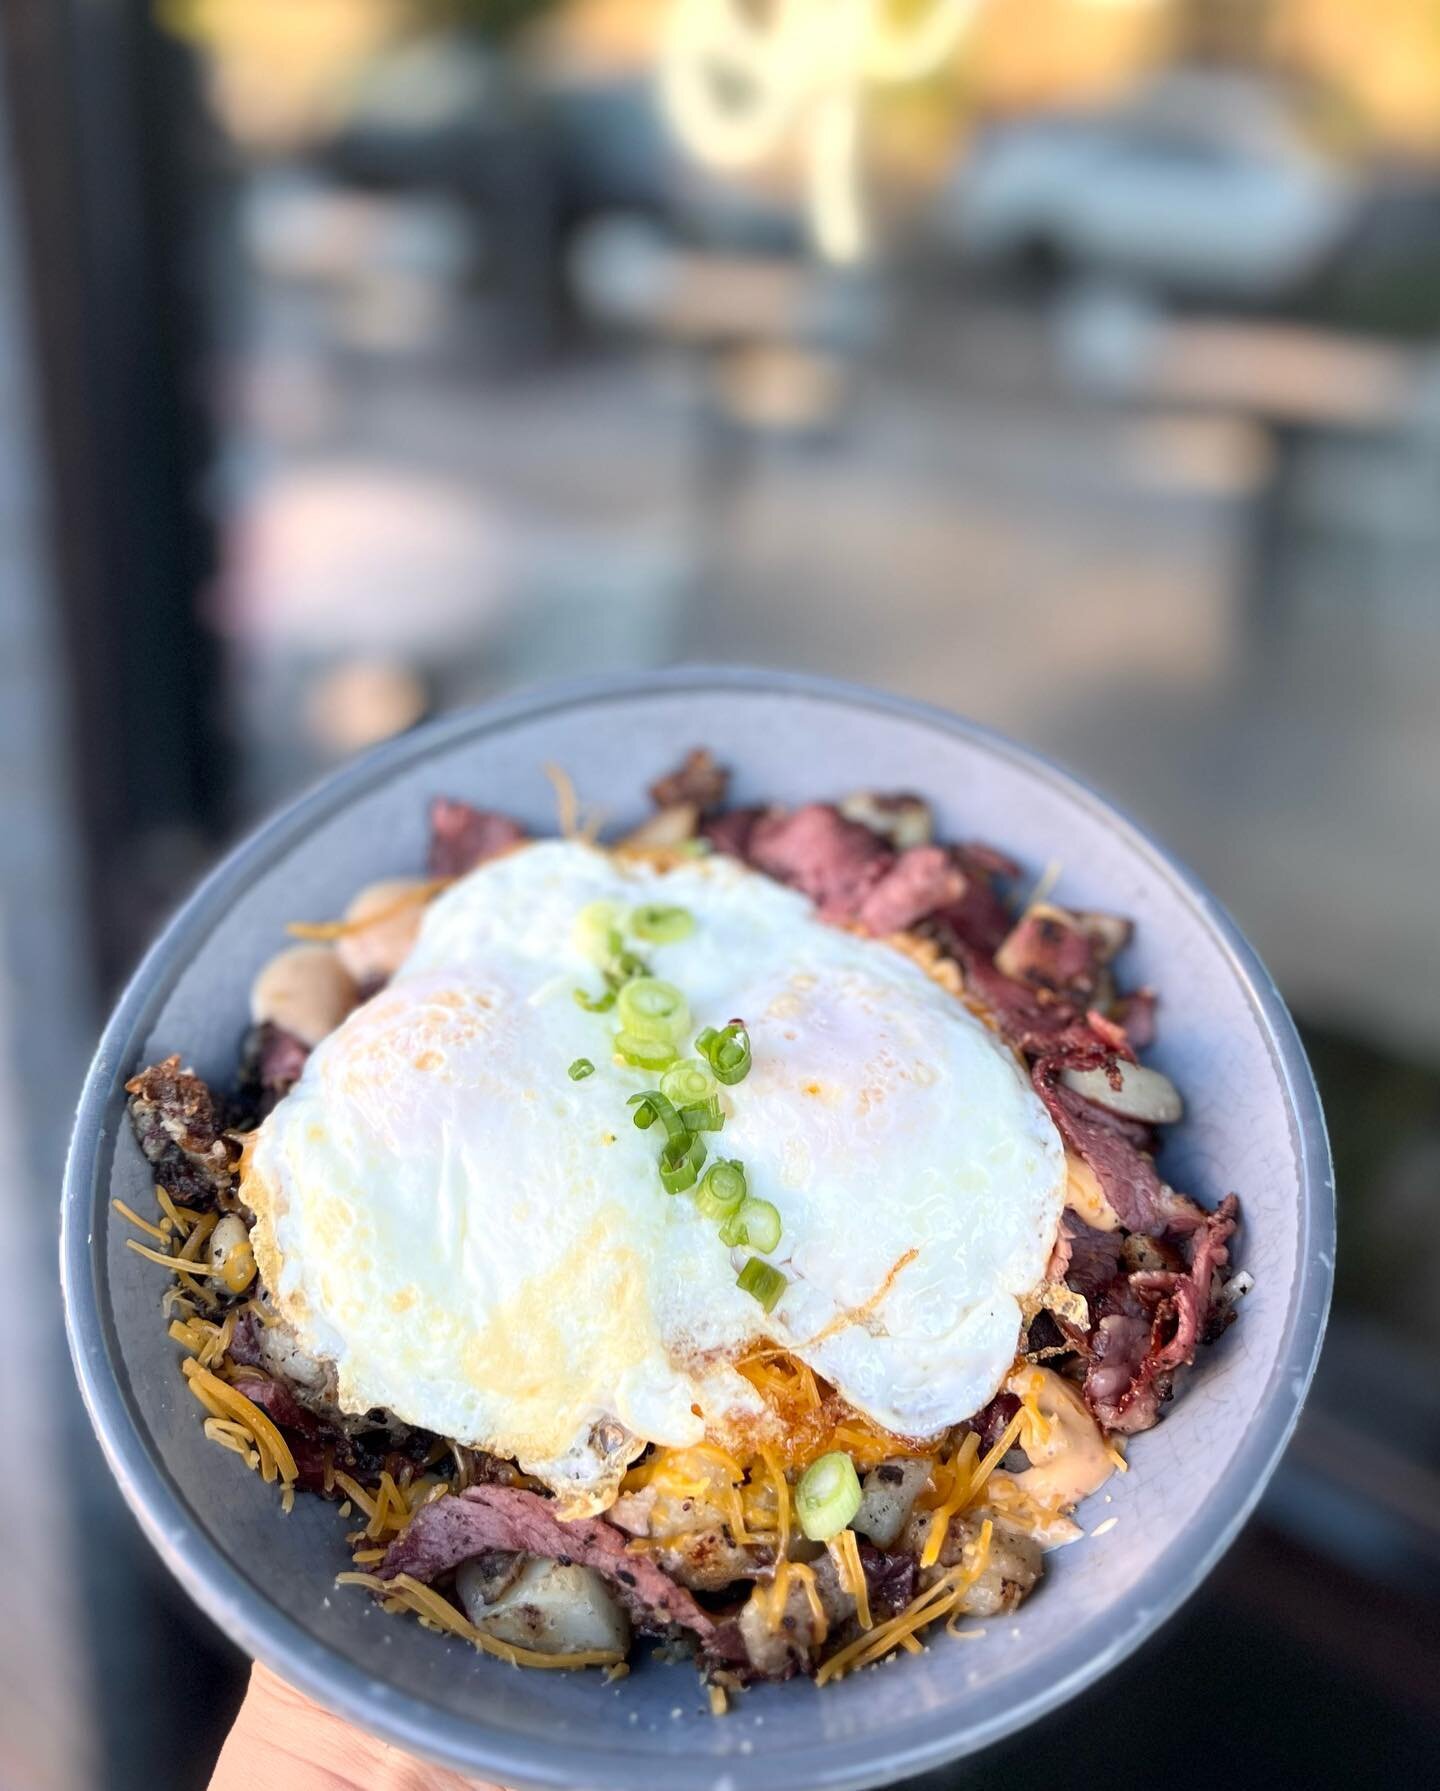 Colder mornings call for warm and comfy breakfasts with loved ones! 🤗

Try our Pastrami Hash Bowl this weekend for a hearty and homey breakfast 🥰